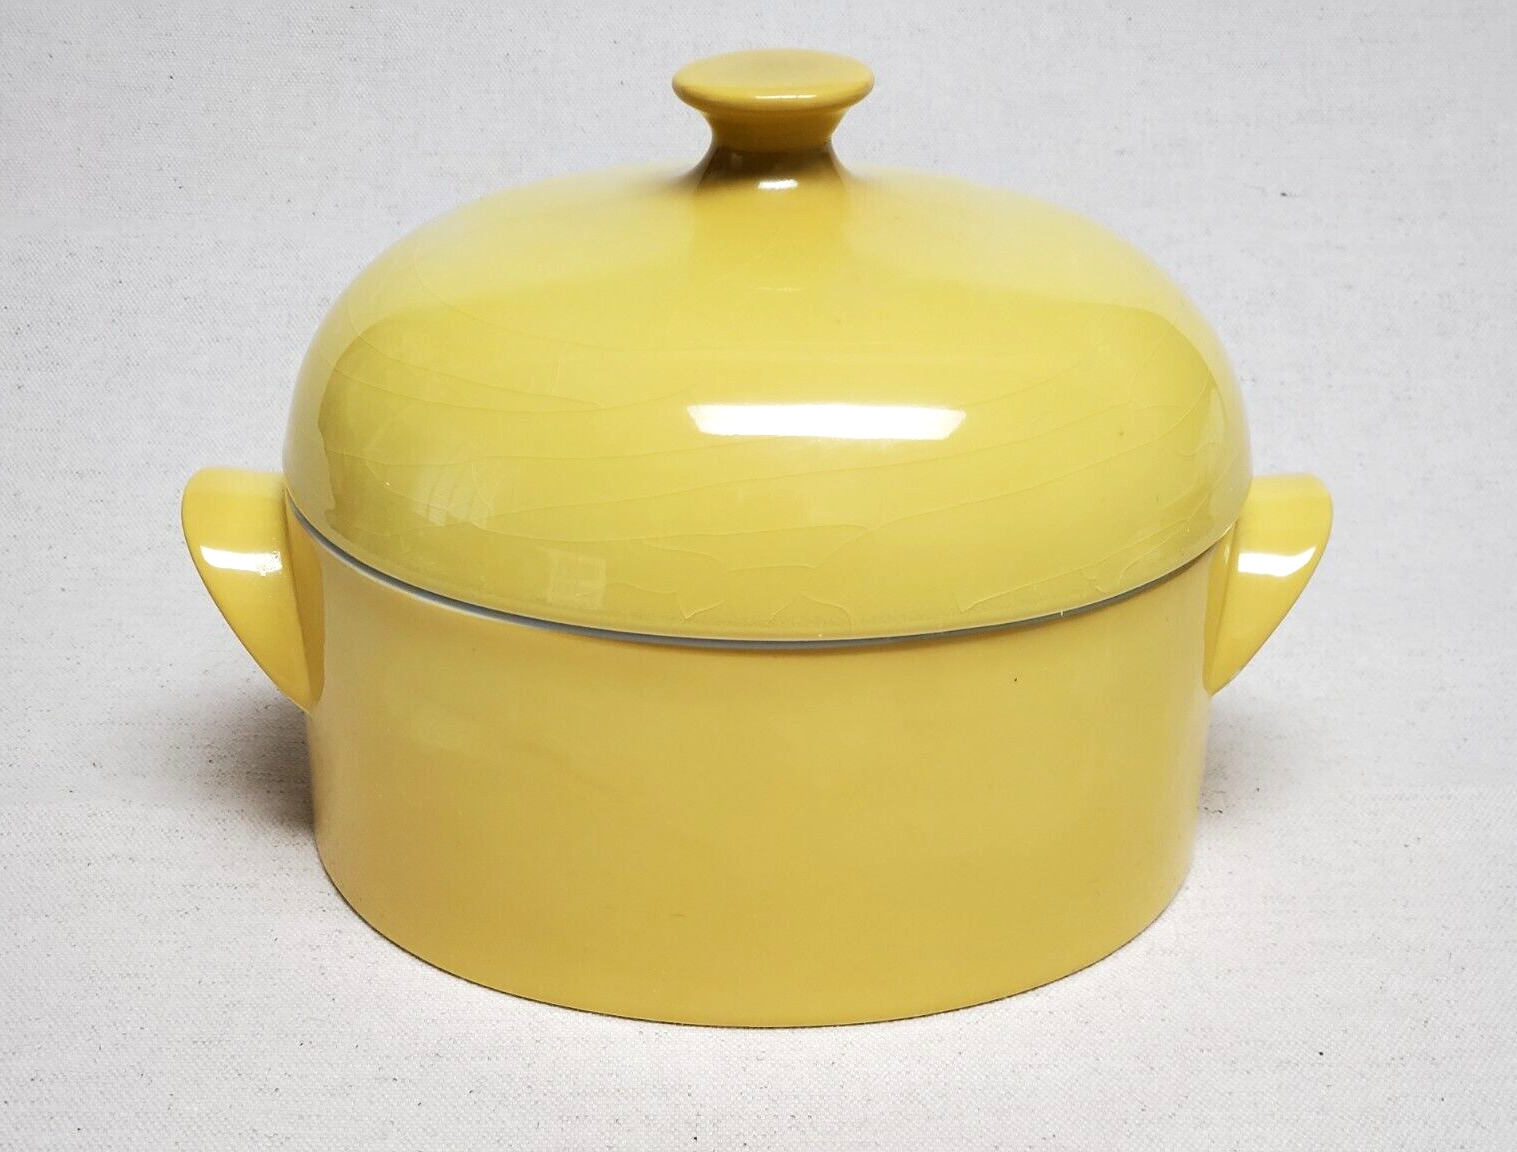 ARABIA Finland Aatami Birger Kaipiainen Yellow Covered Dish Canister Broth Bowl